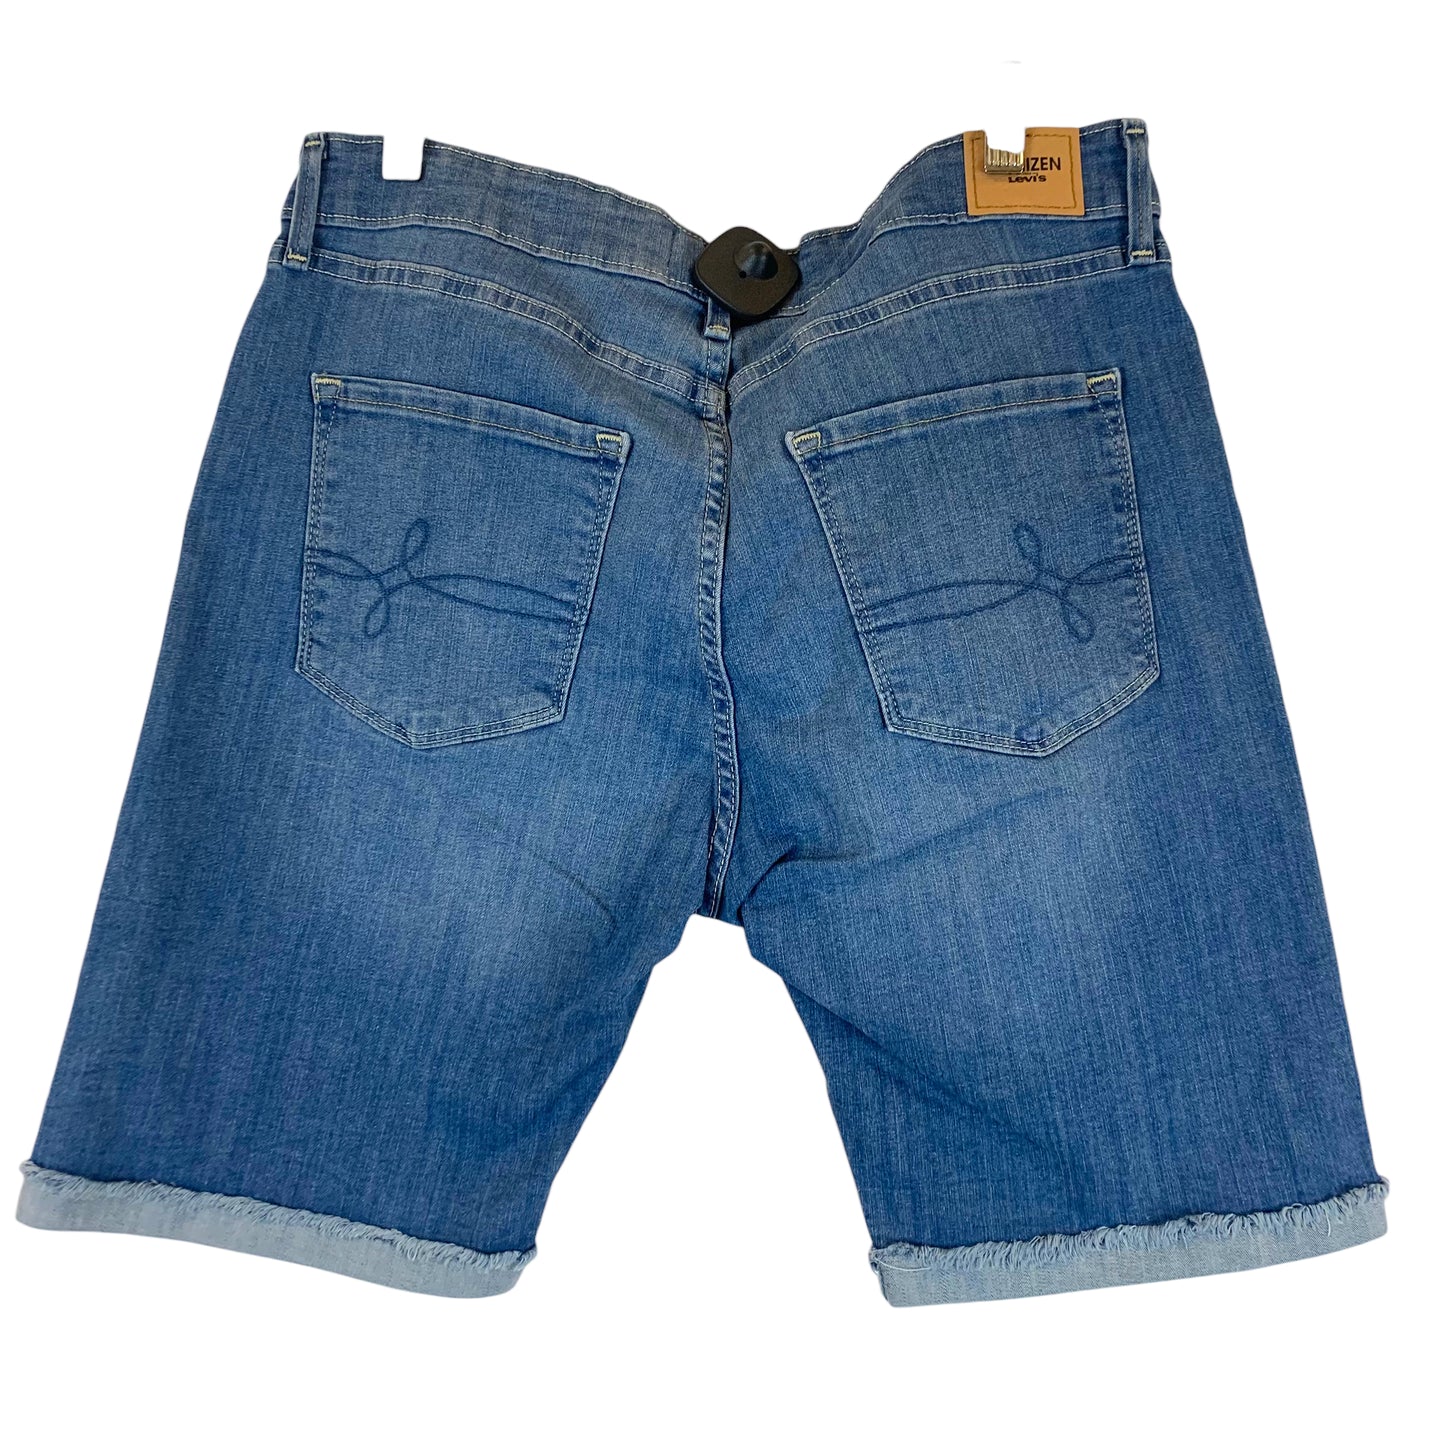 Shorts By Levis Size: XL